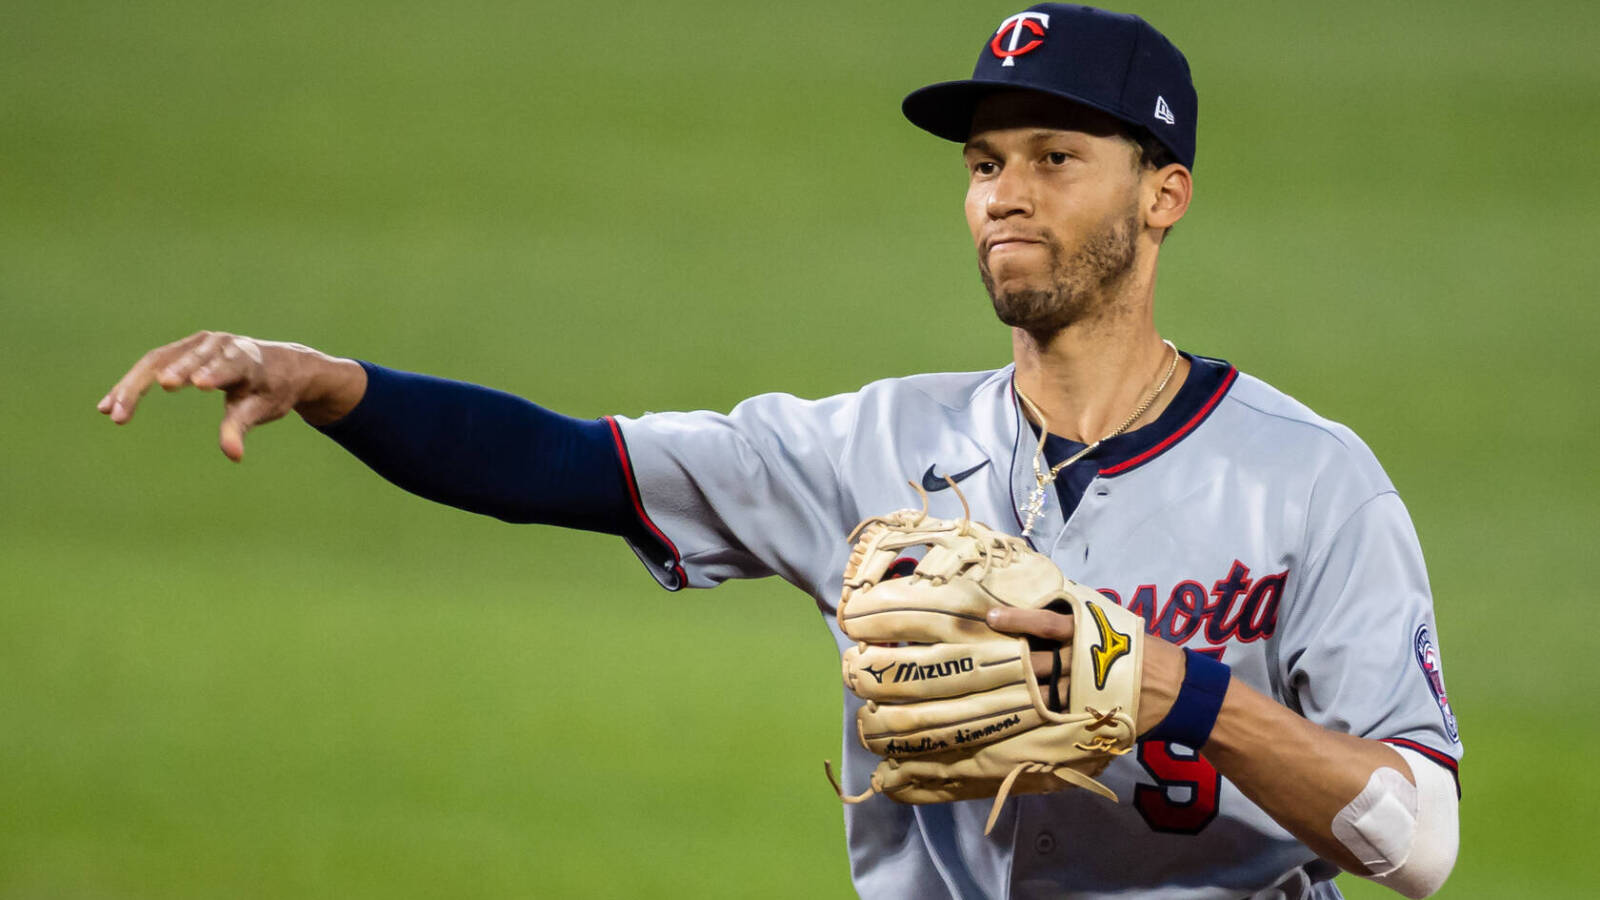 Cubs Sign SS Andrelton Simmons to One-Year Deal - Cubs Insider